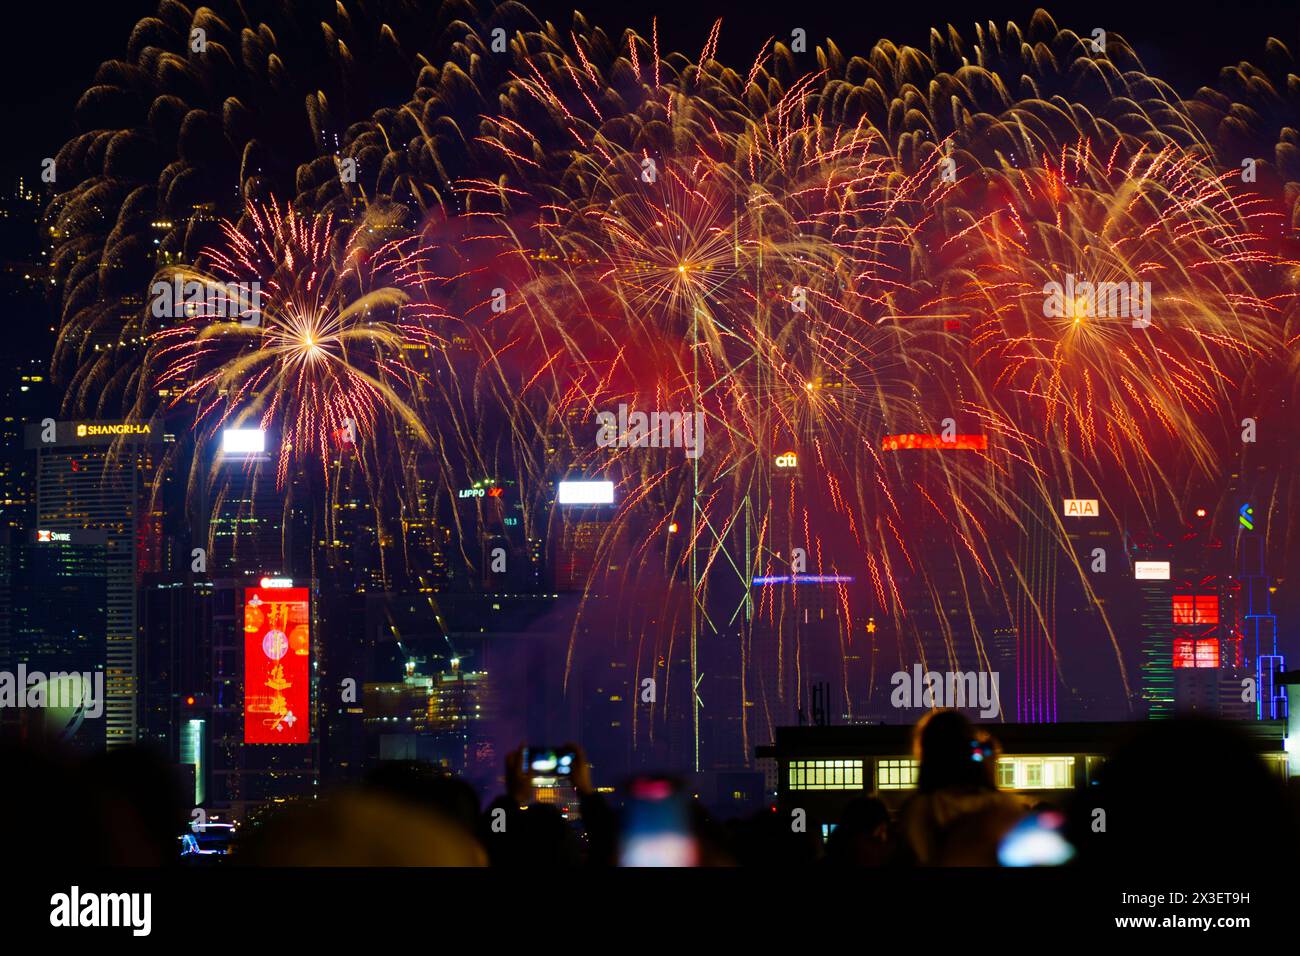 Fireworks show on Chinese New Year Eve in Hong Kong, China with ...